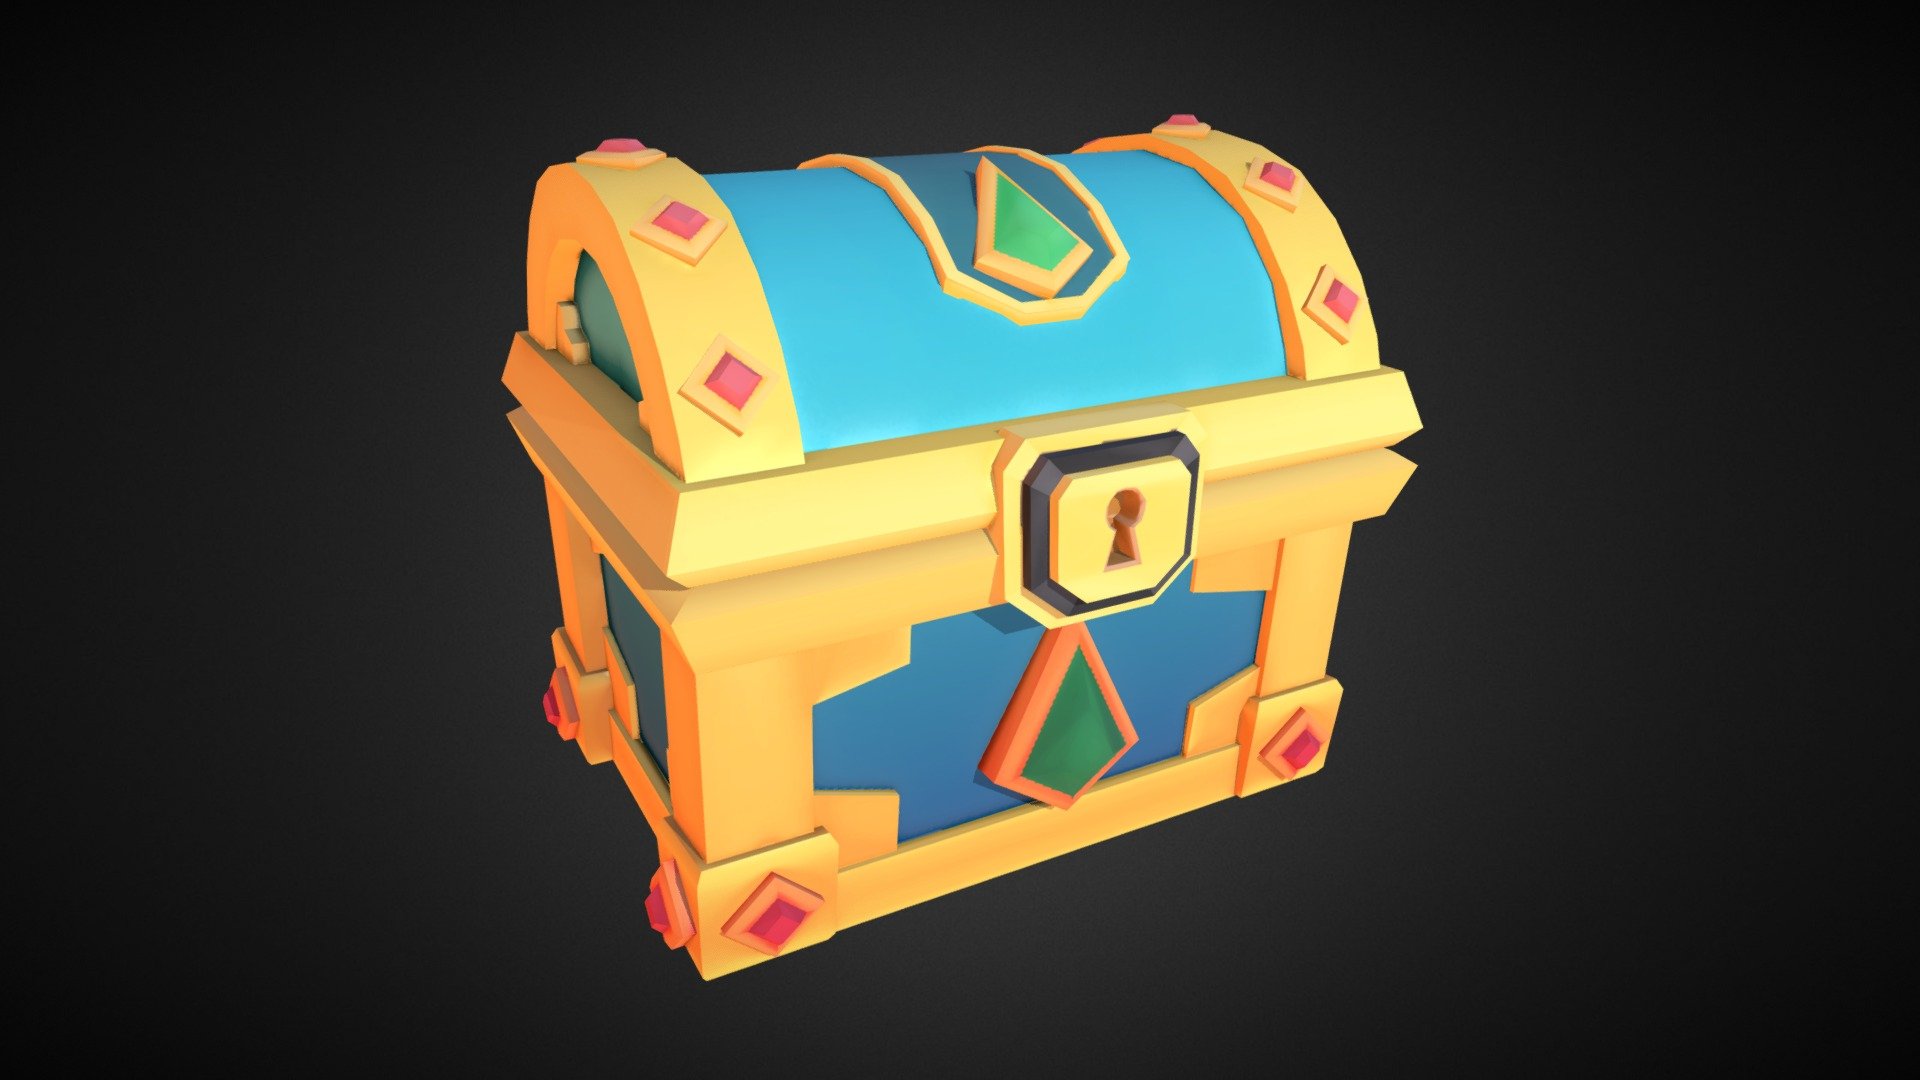 This chest was created for a game in my graduate class. It was created in Maya and textured in Substance Painter 3d model